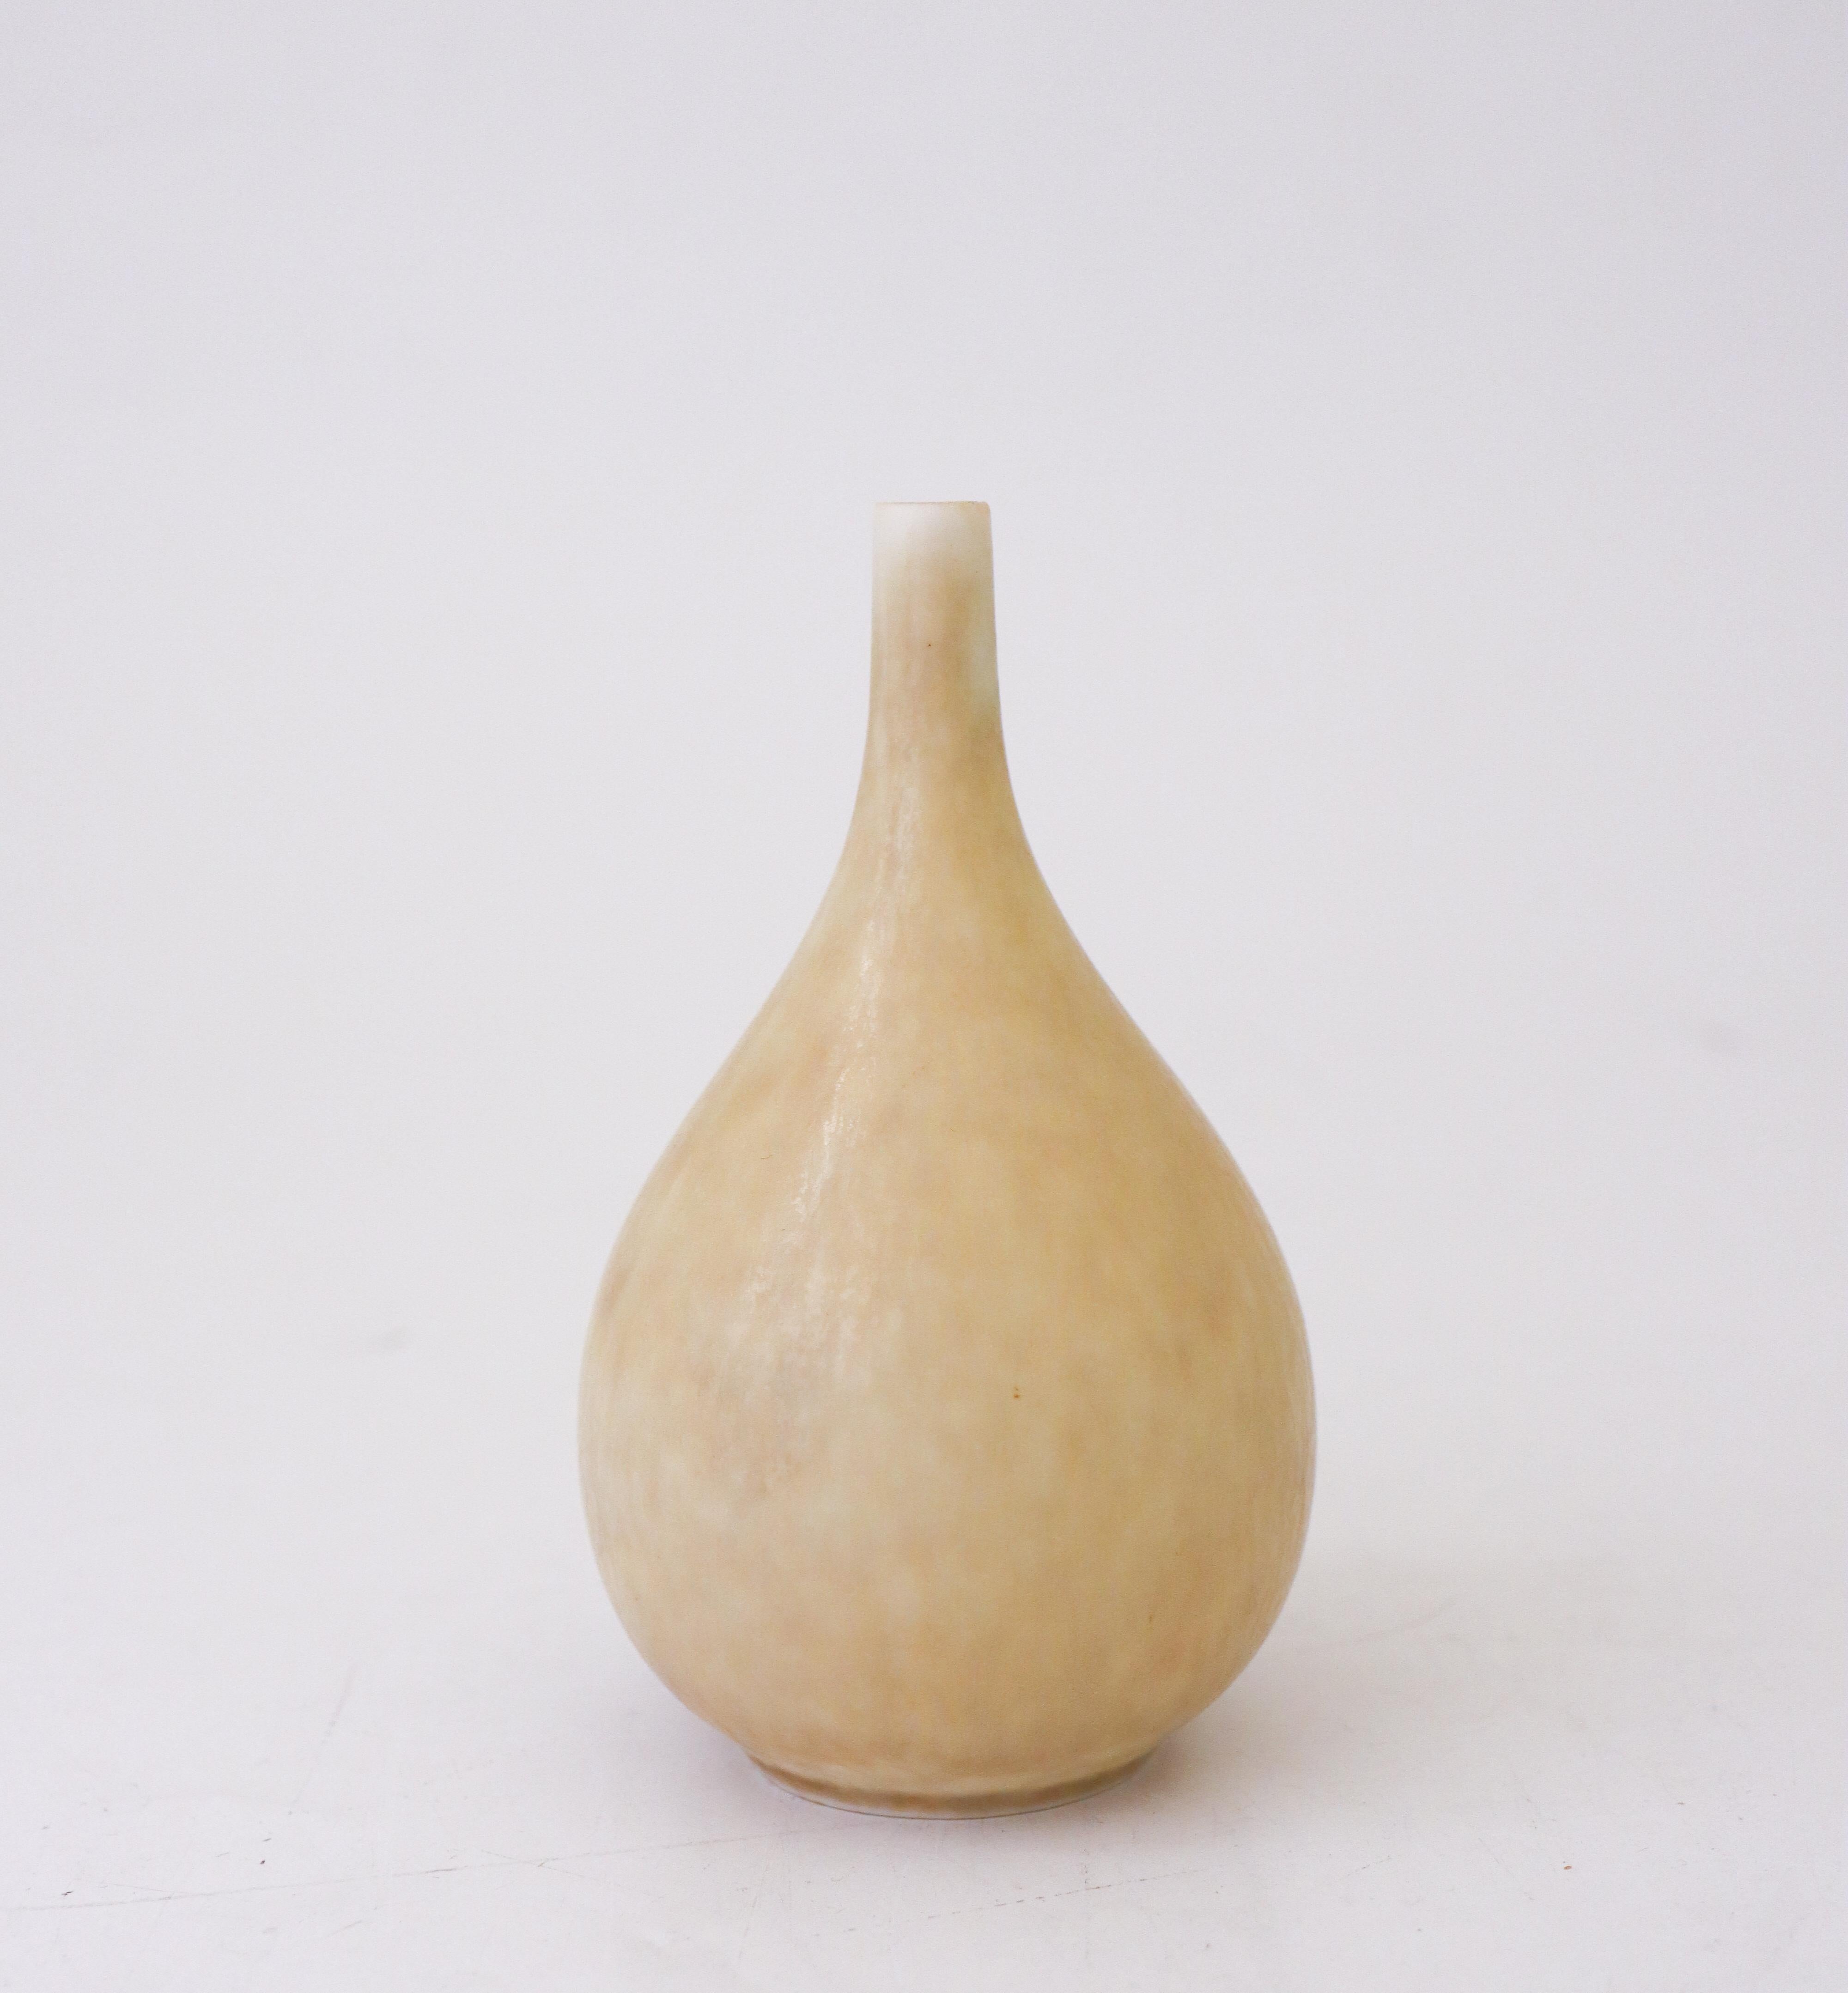 A ceramic vase with yellow / lightyellow (beige) glaze designed by Carl-Harry Stålhane at Rörstrand. The vase is 13 cm (5.2